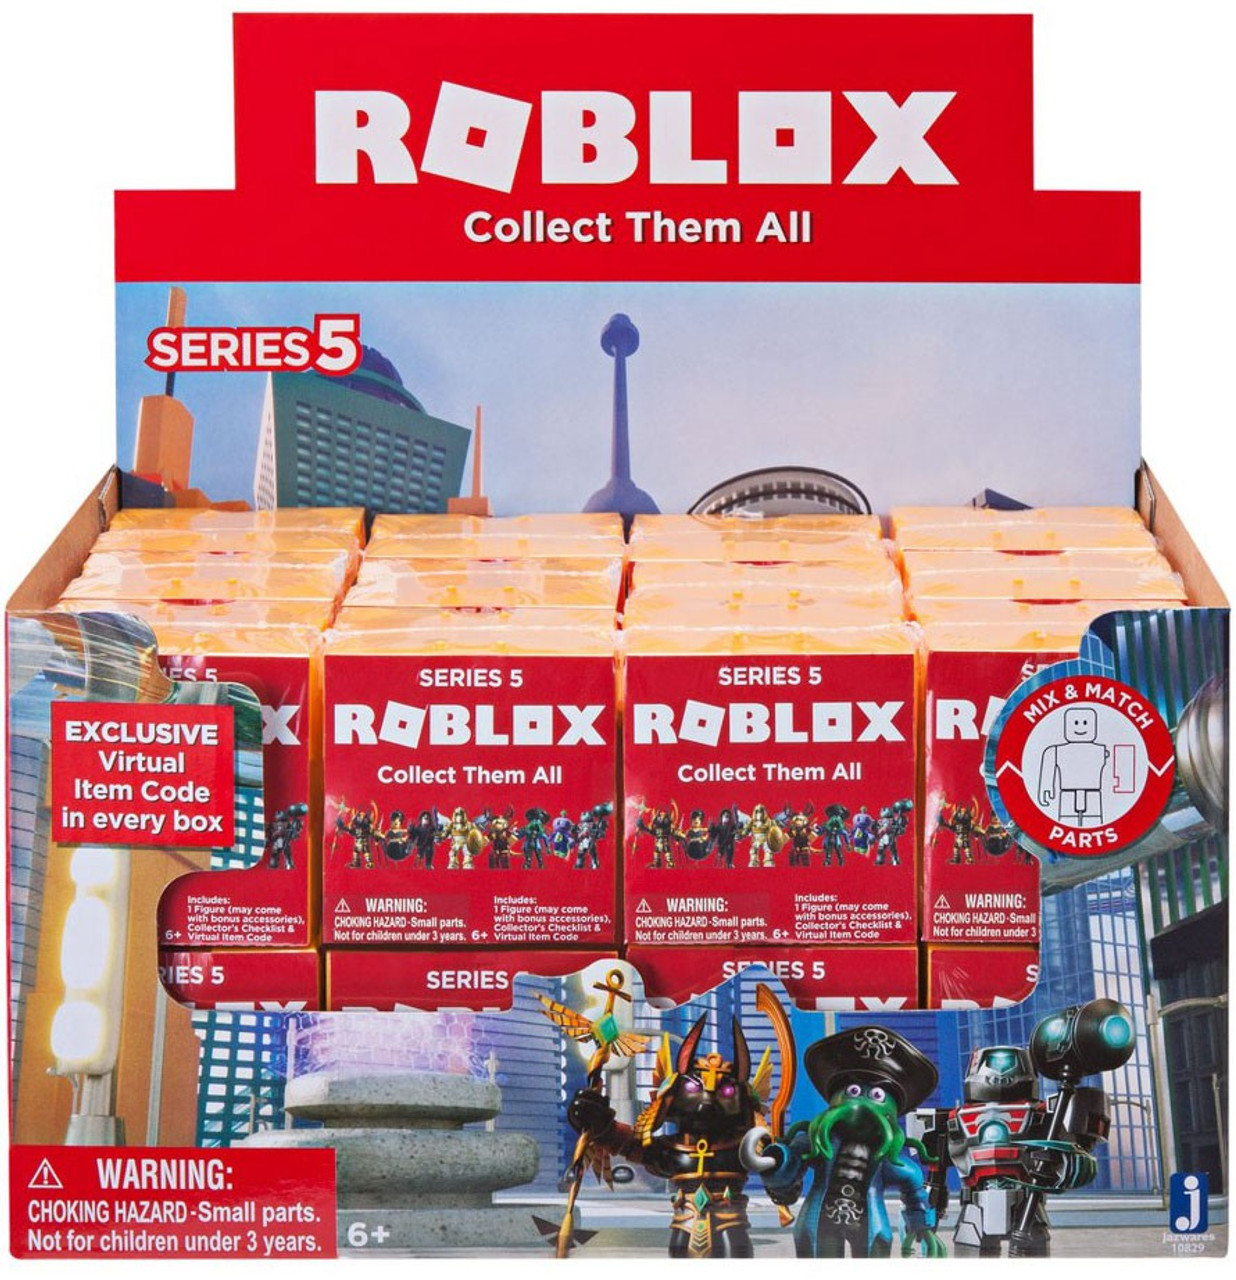 Roblox Series 5 Yellow Gold Blind Box Toys Figures1 2 3 4 - roblox api sound